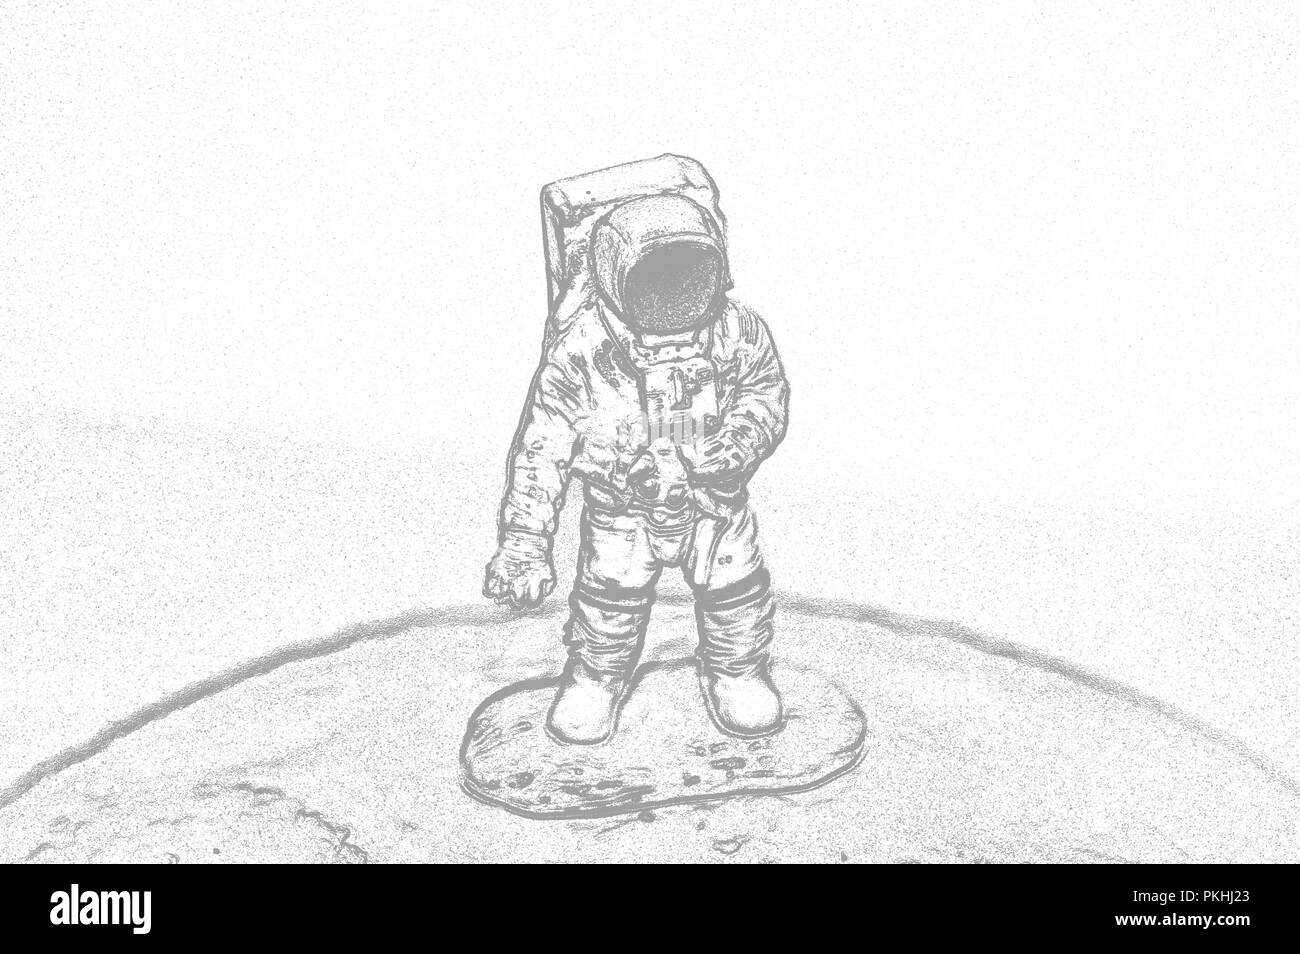 An astronaut on the moon in a space suit. Illustration Stock Photo